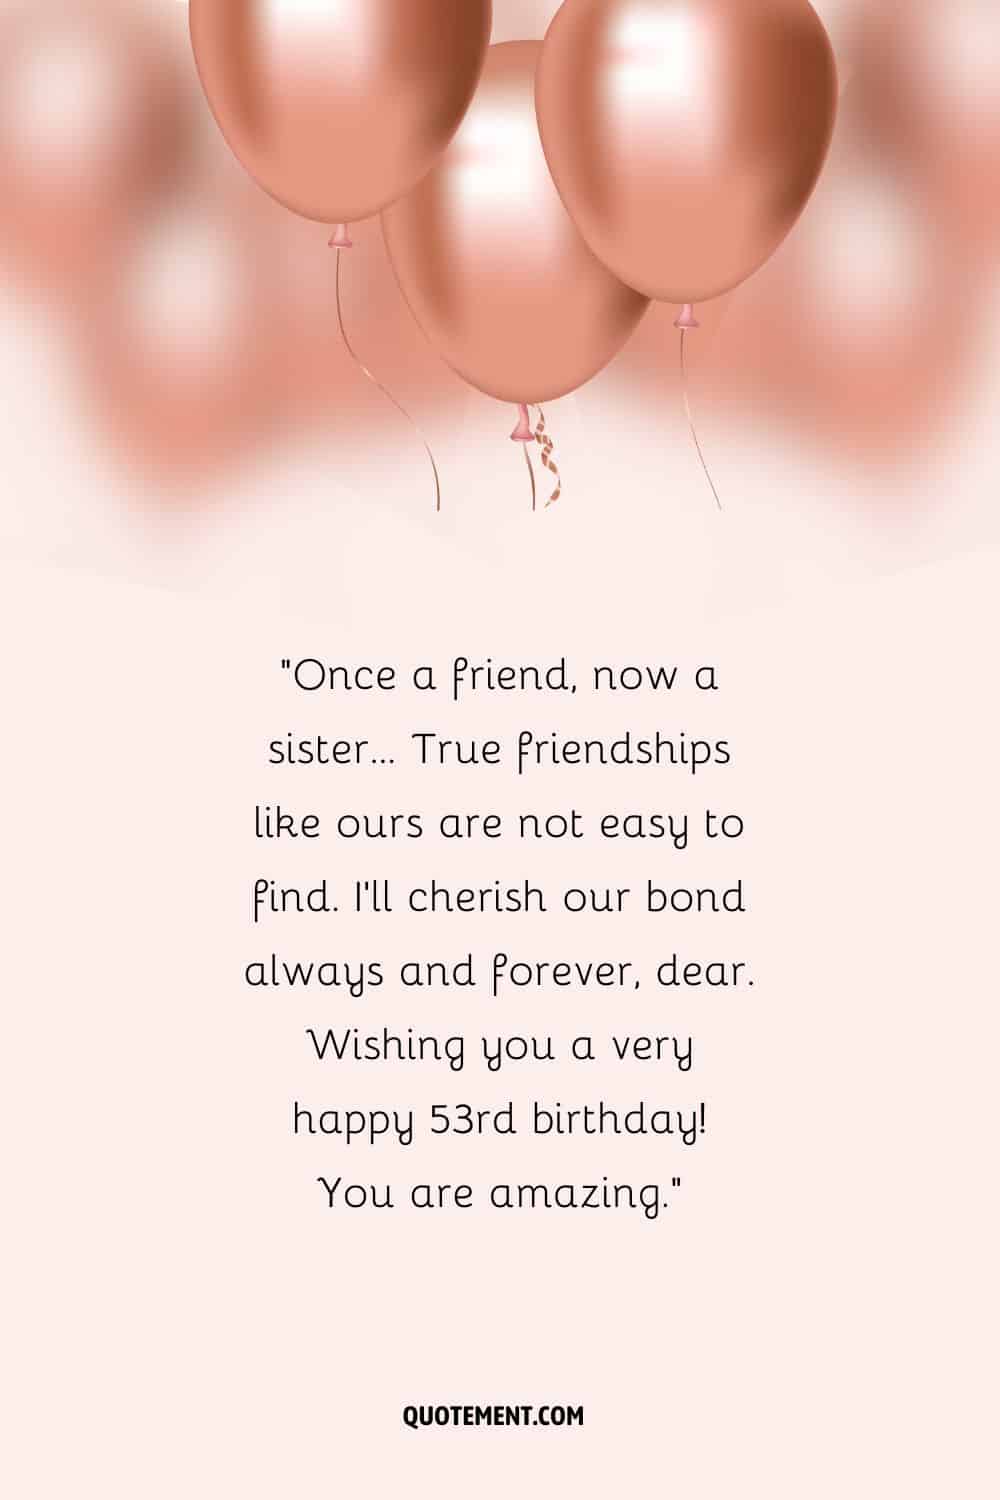 Touching message for a friend's 53rd birthday and rose gold balloons